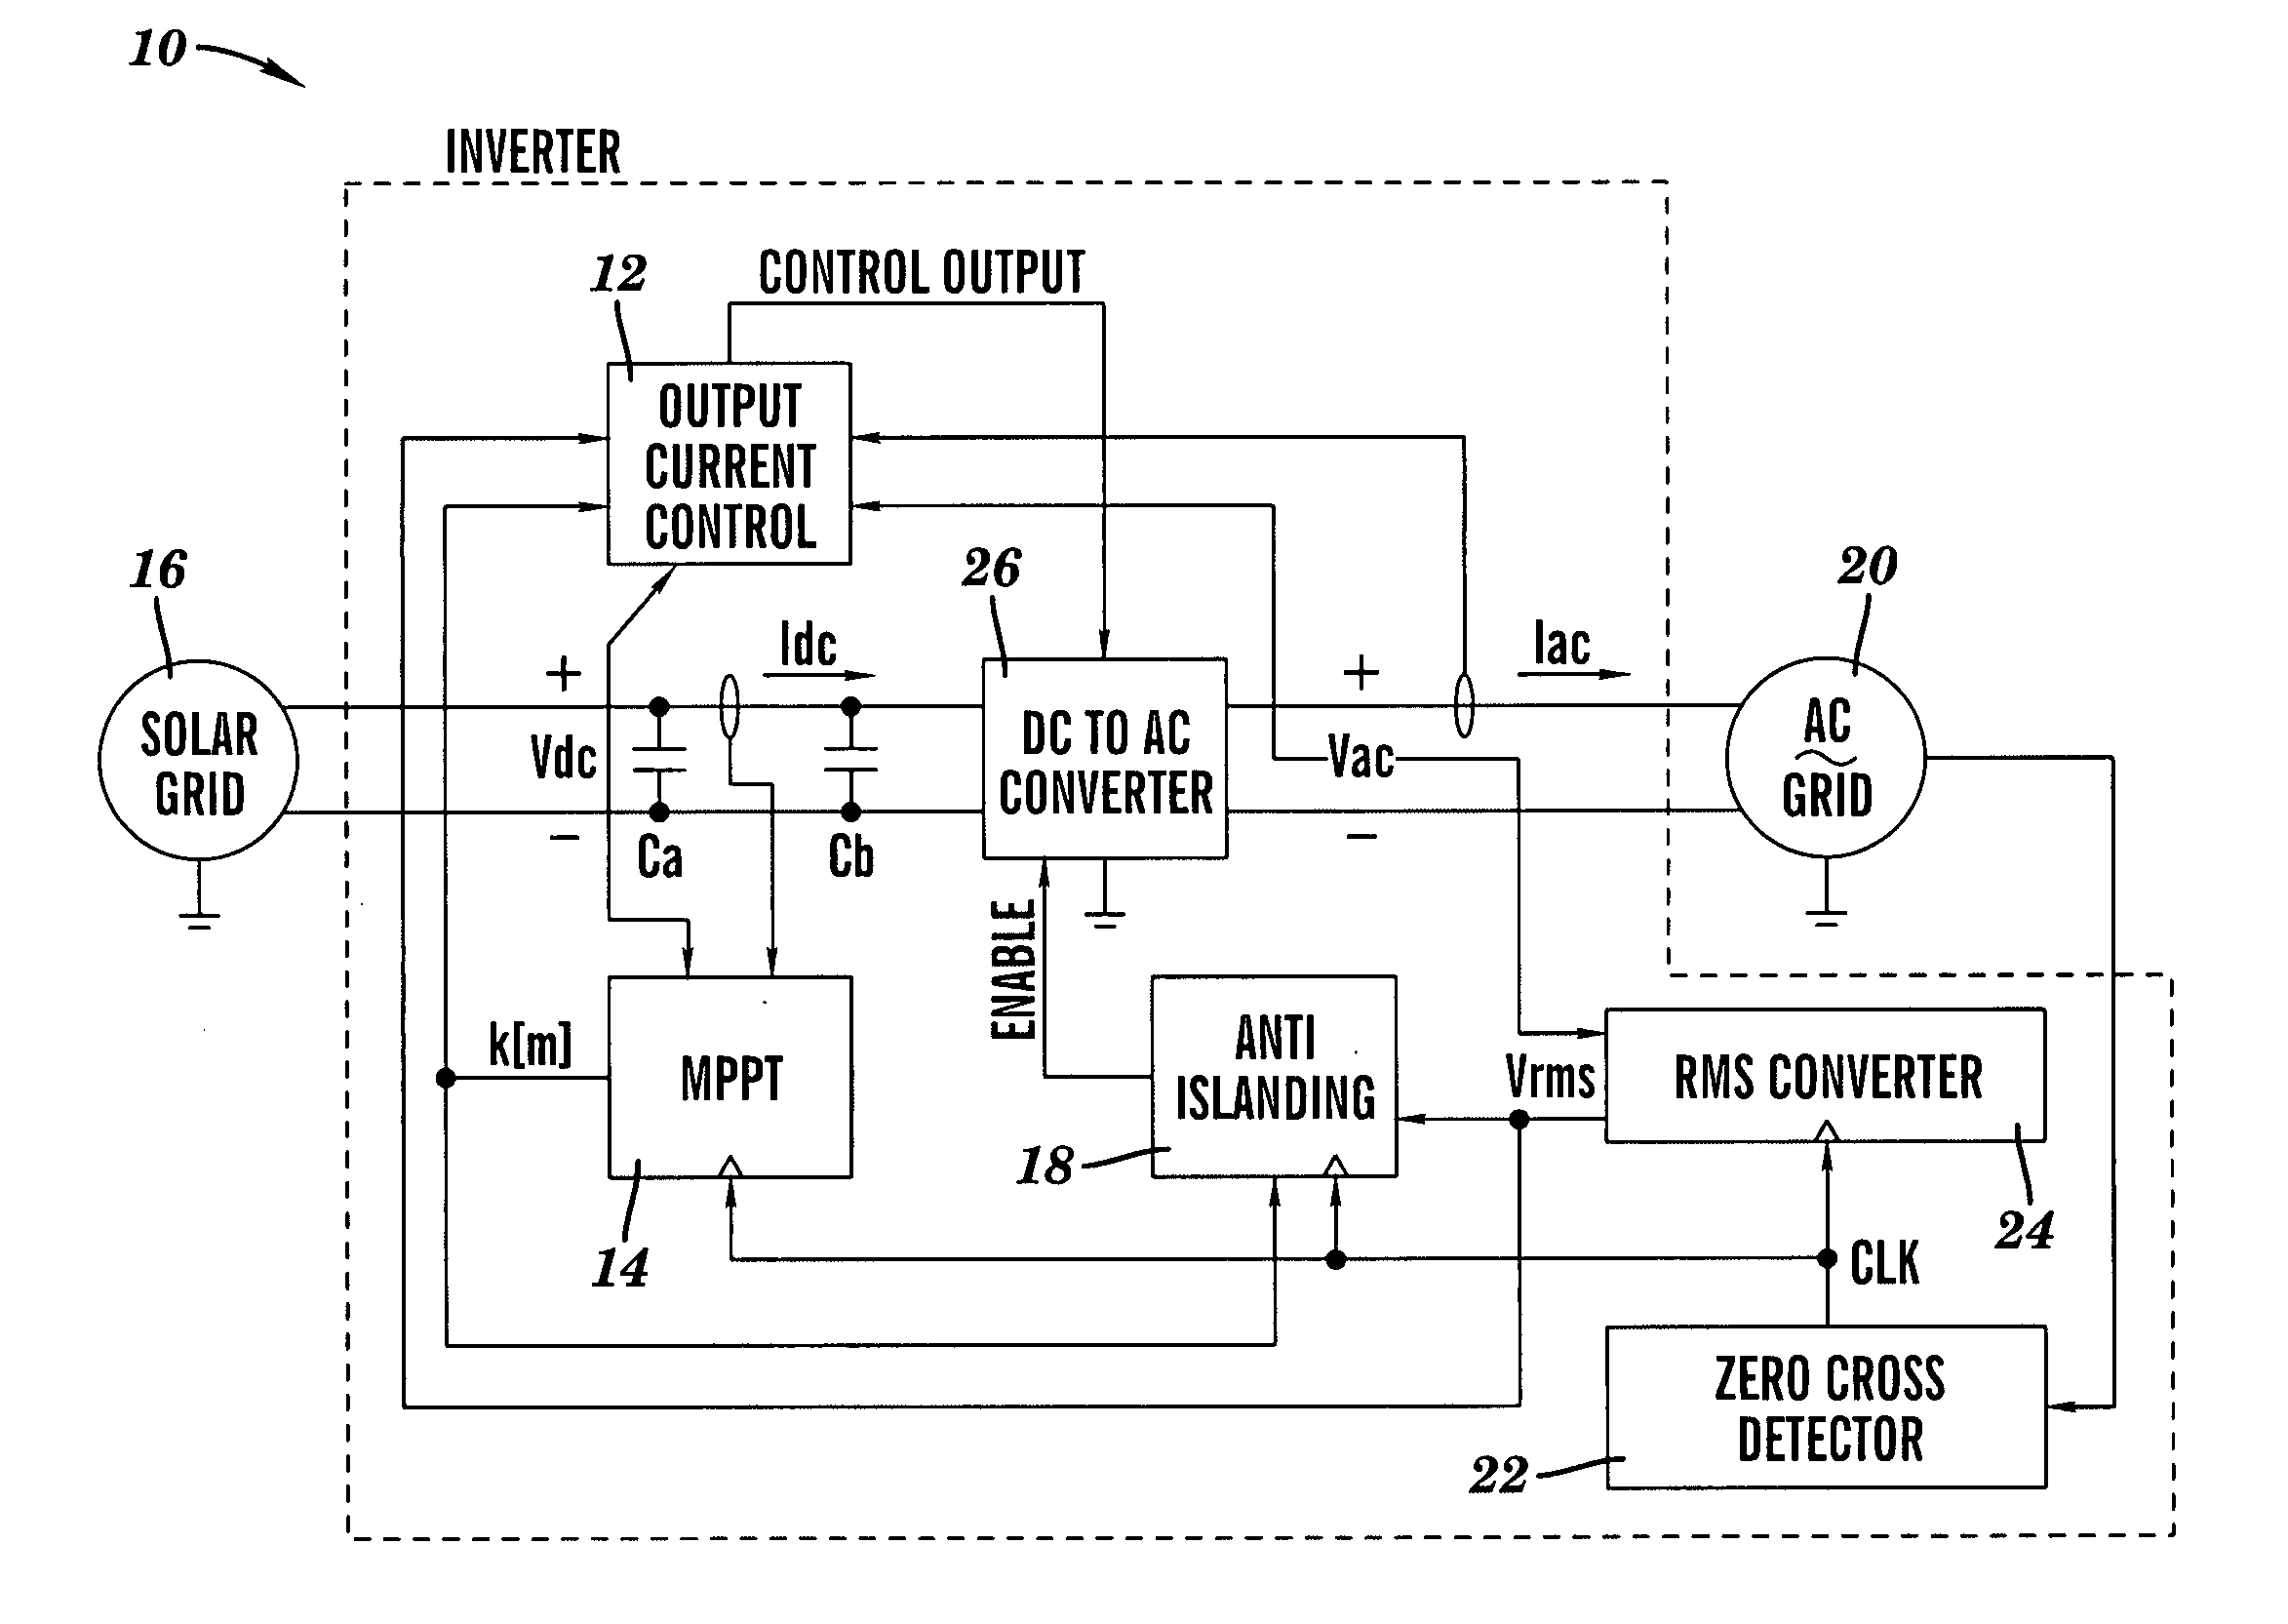 Inverter control methodology for distributed generation sources connected to a utility grid